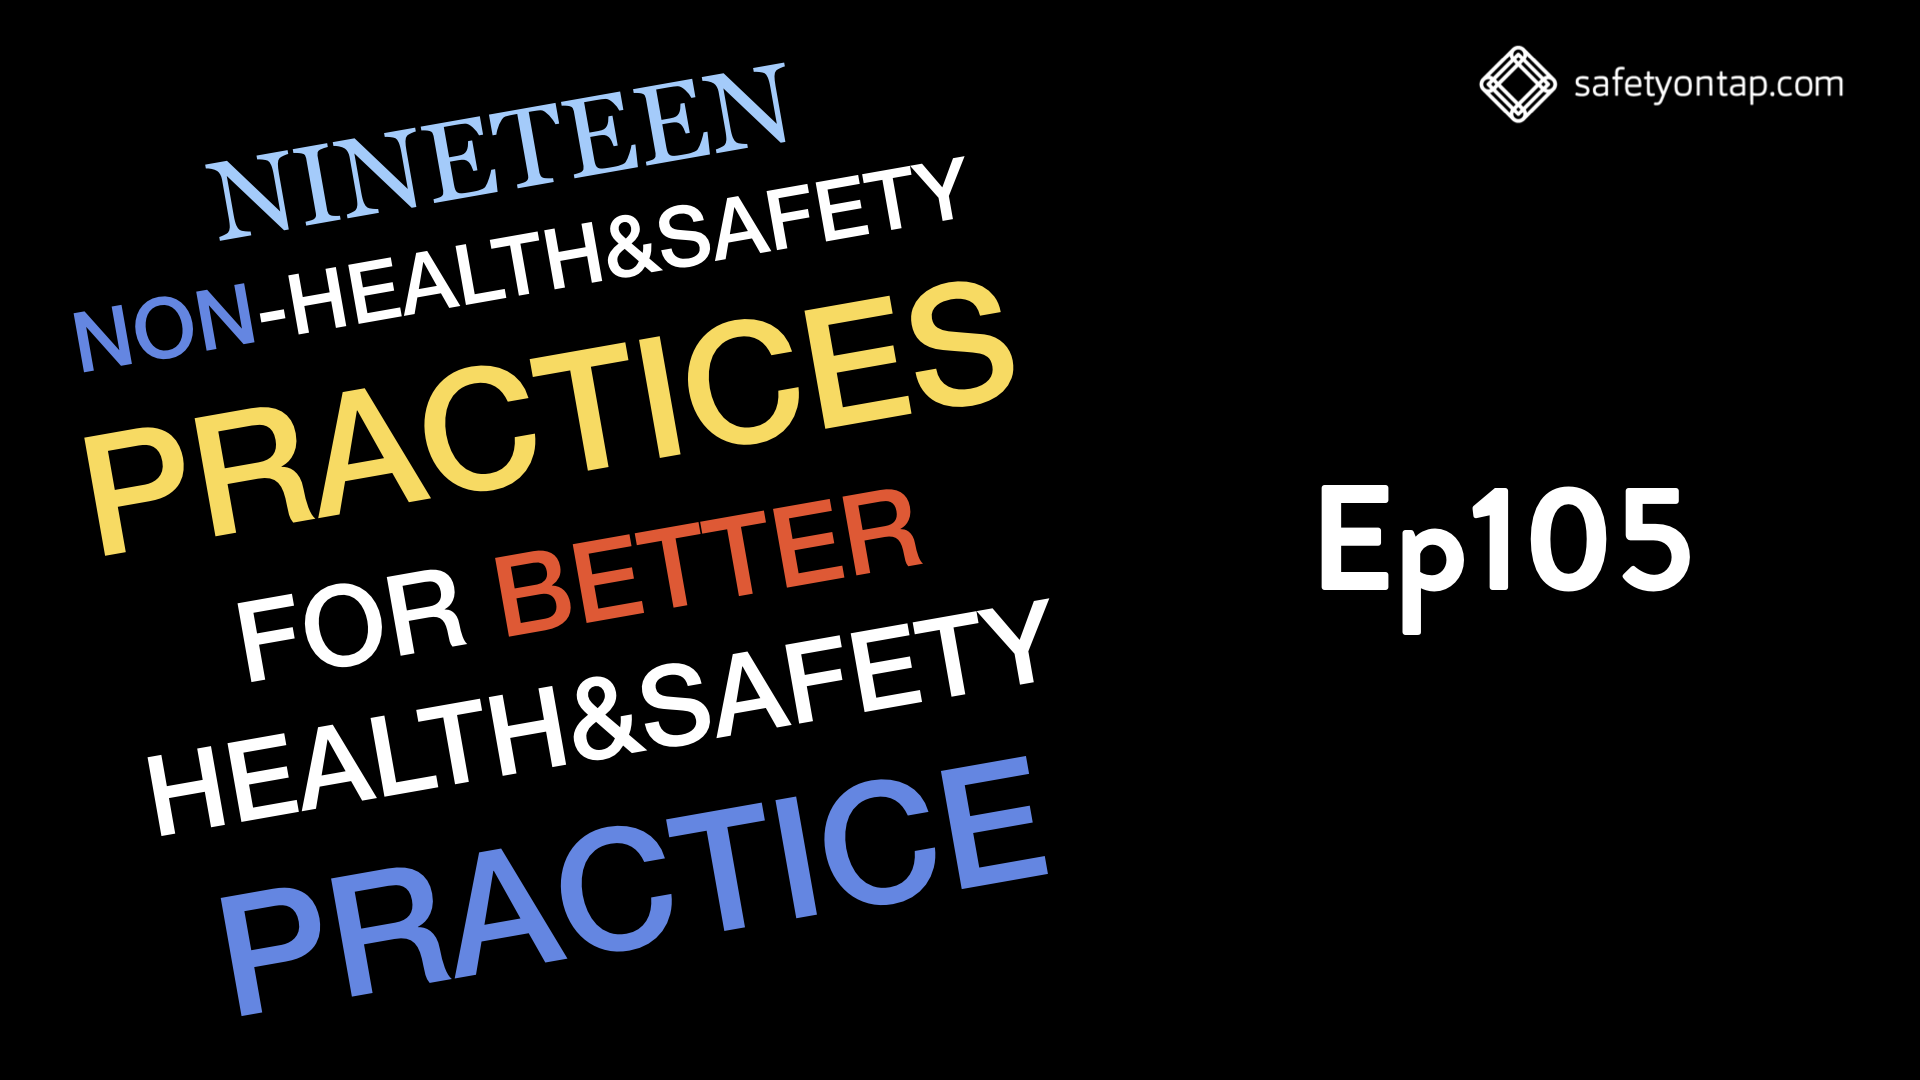 Ep105: Nineteen non-health & safety practices to improve H&S